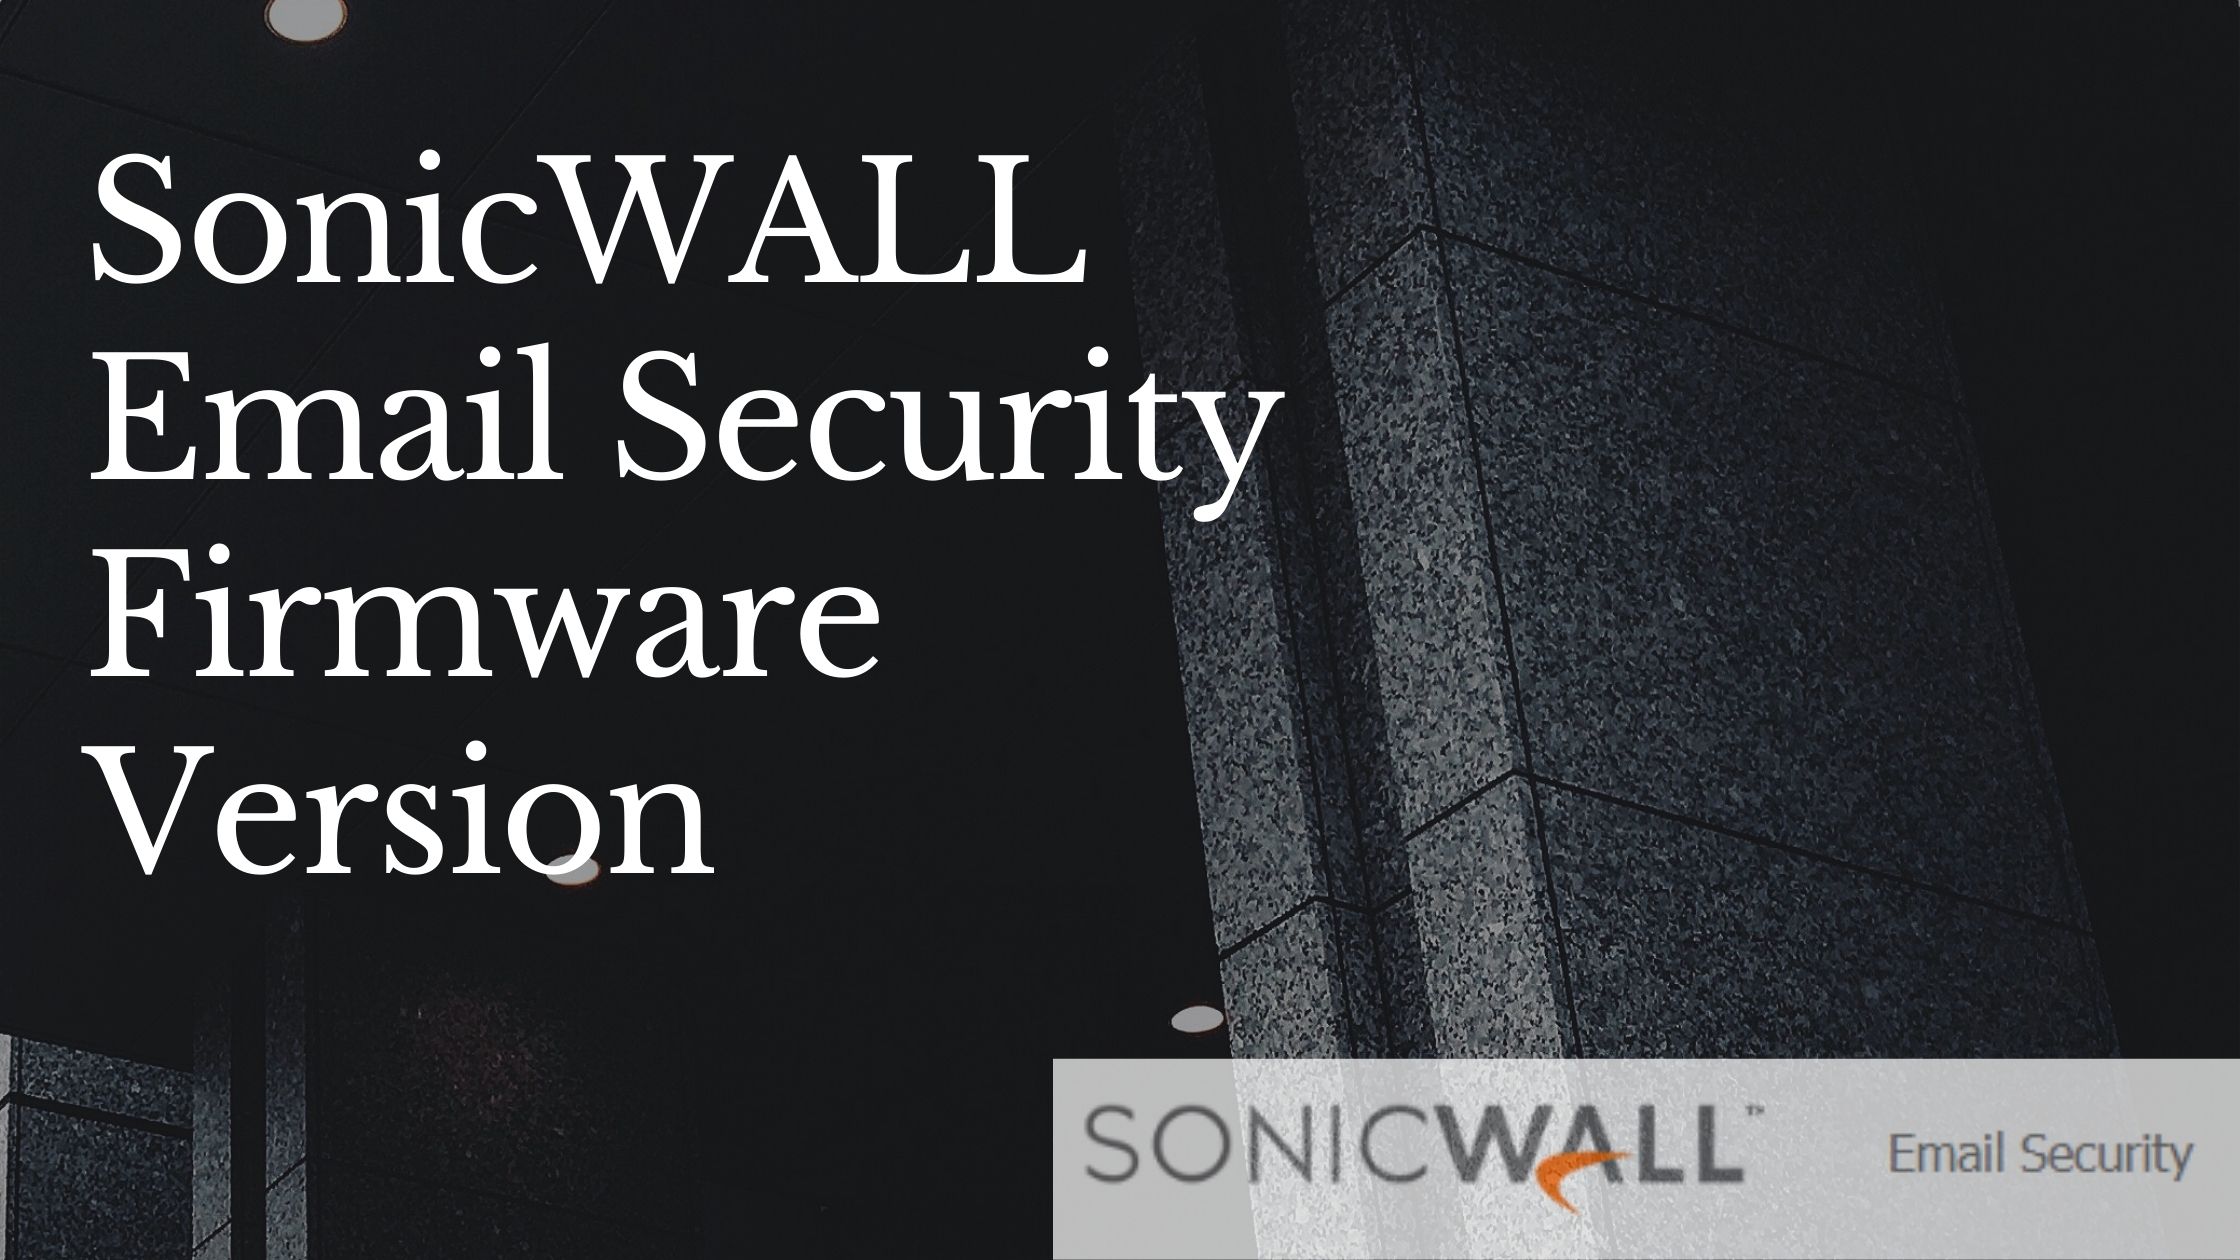 SonicWALL Email Security Firmware Version